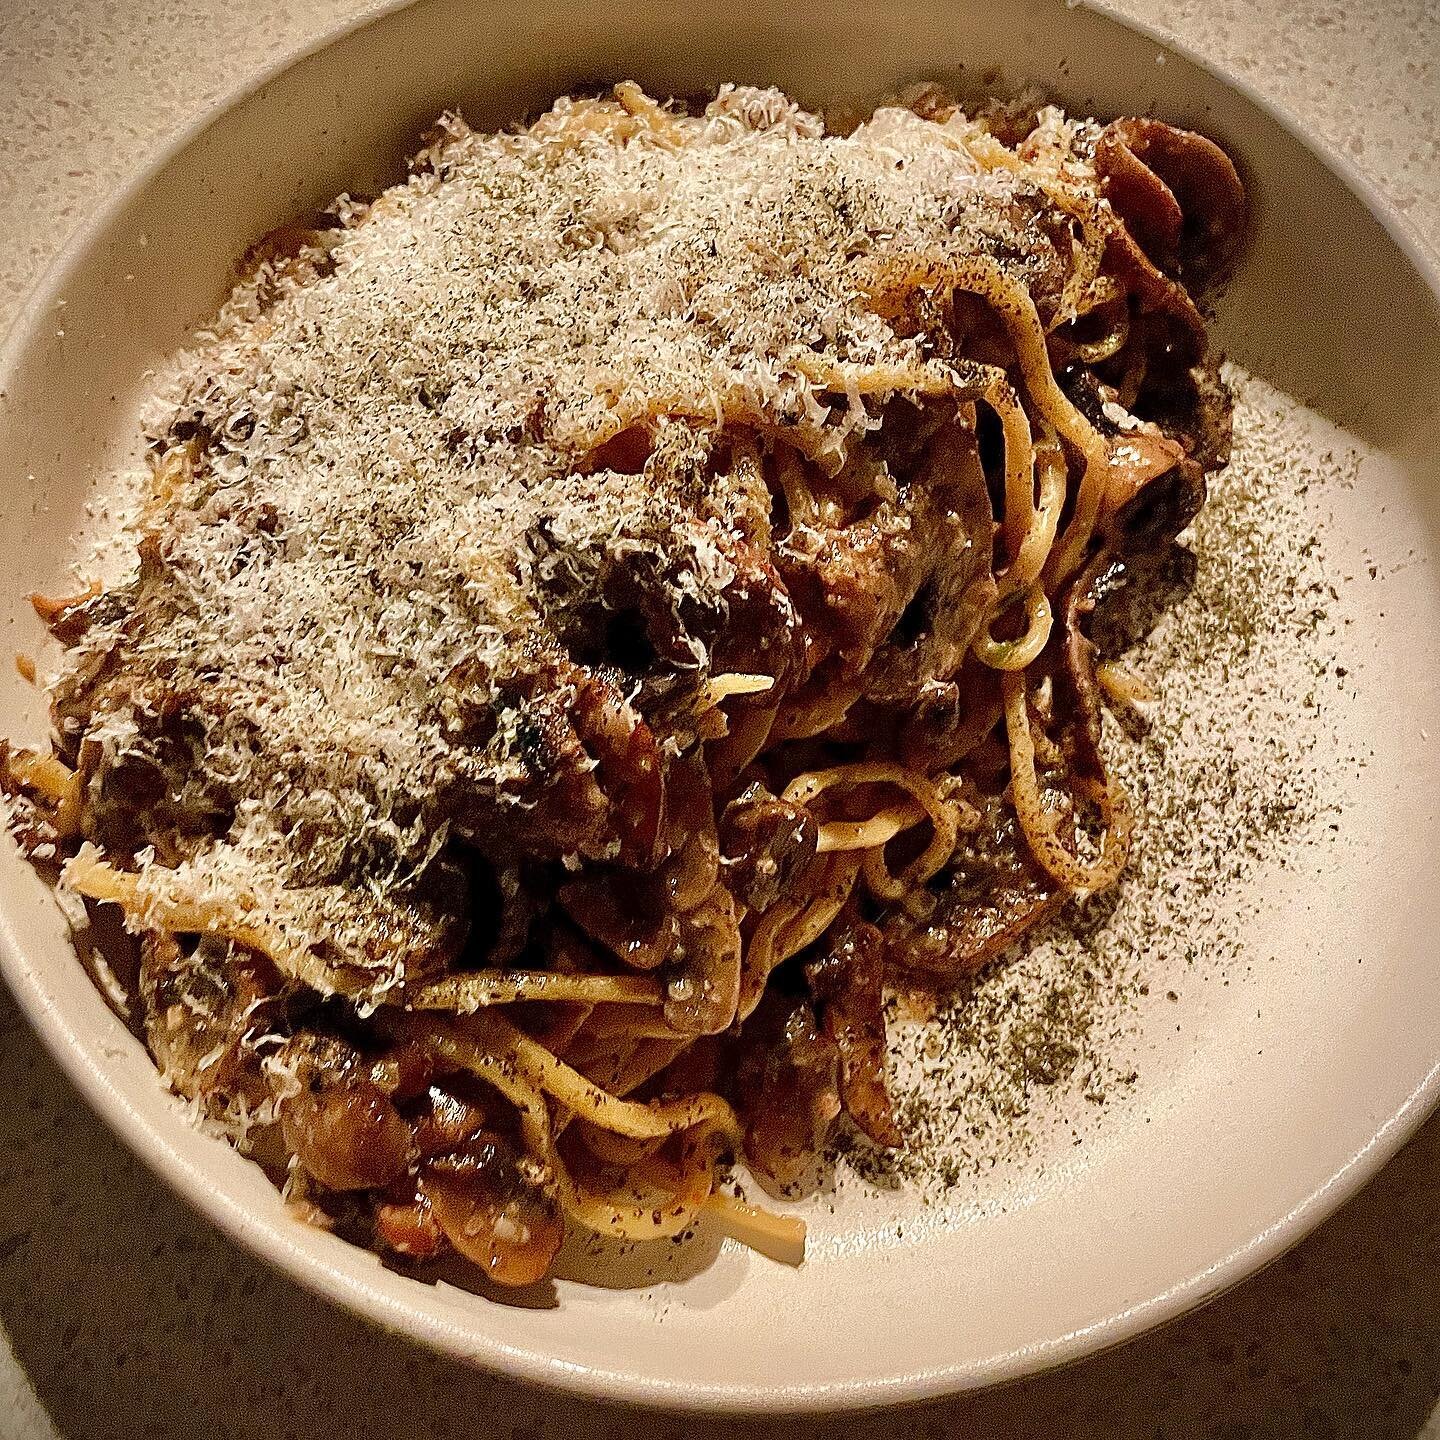 Always thinking of those next flavour combinations, and utilising local produce and products. This one is, dare I say it.. a little bit of a fusion dish using different cuisine flavours and cooking methods.

Spaghetti alla chittara, XO mushrooms, fer